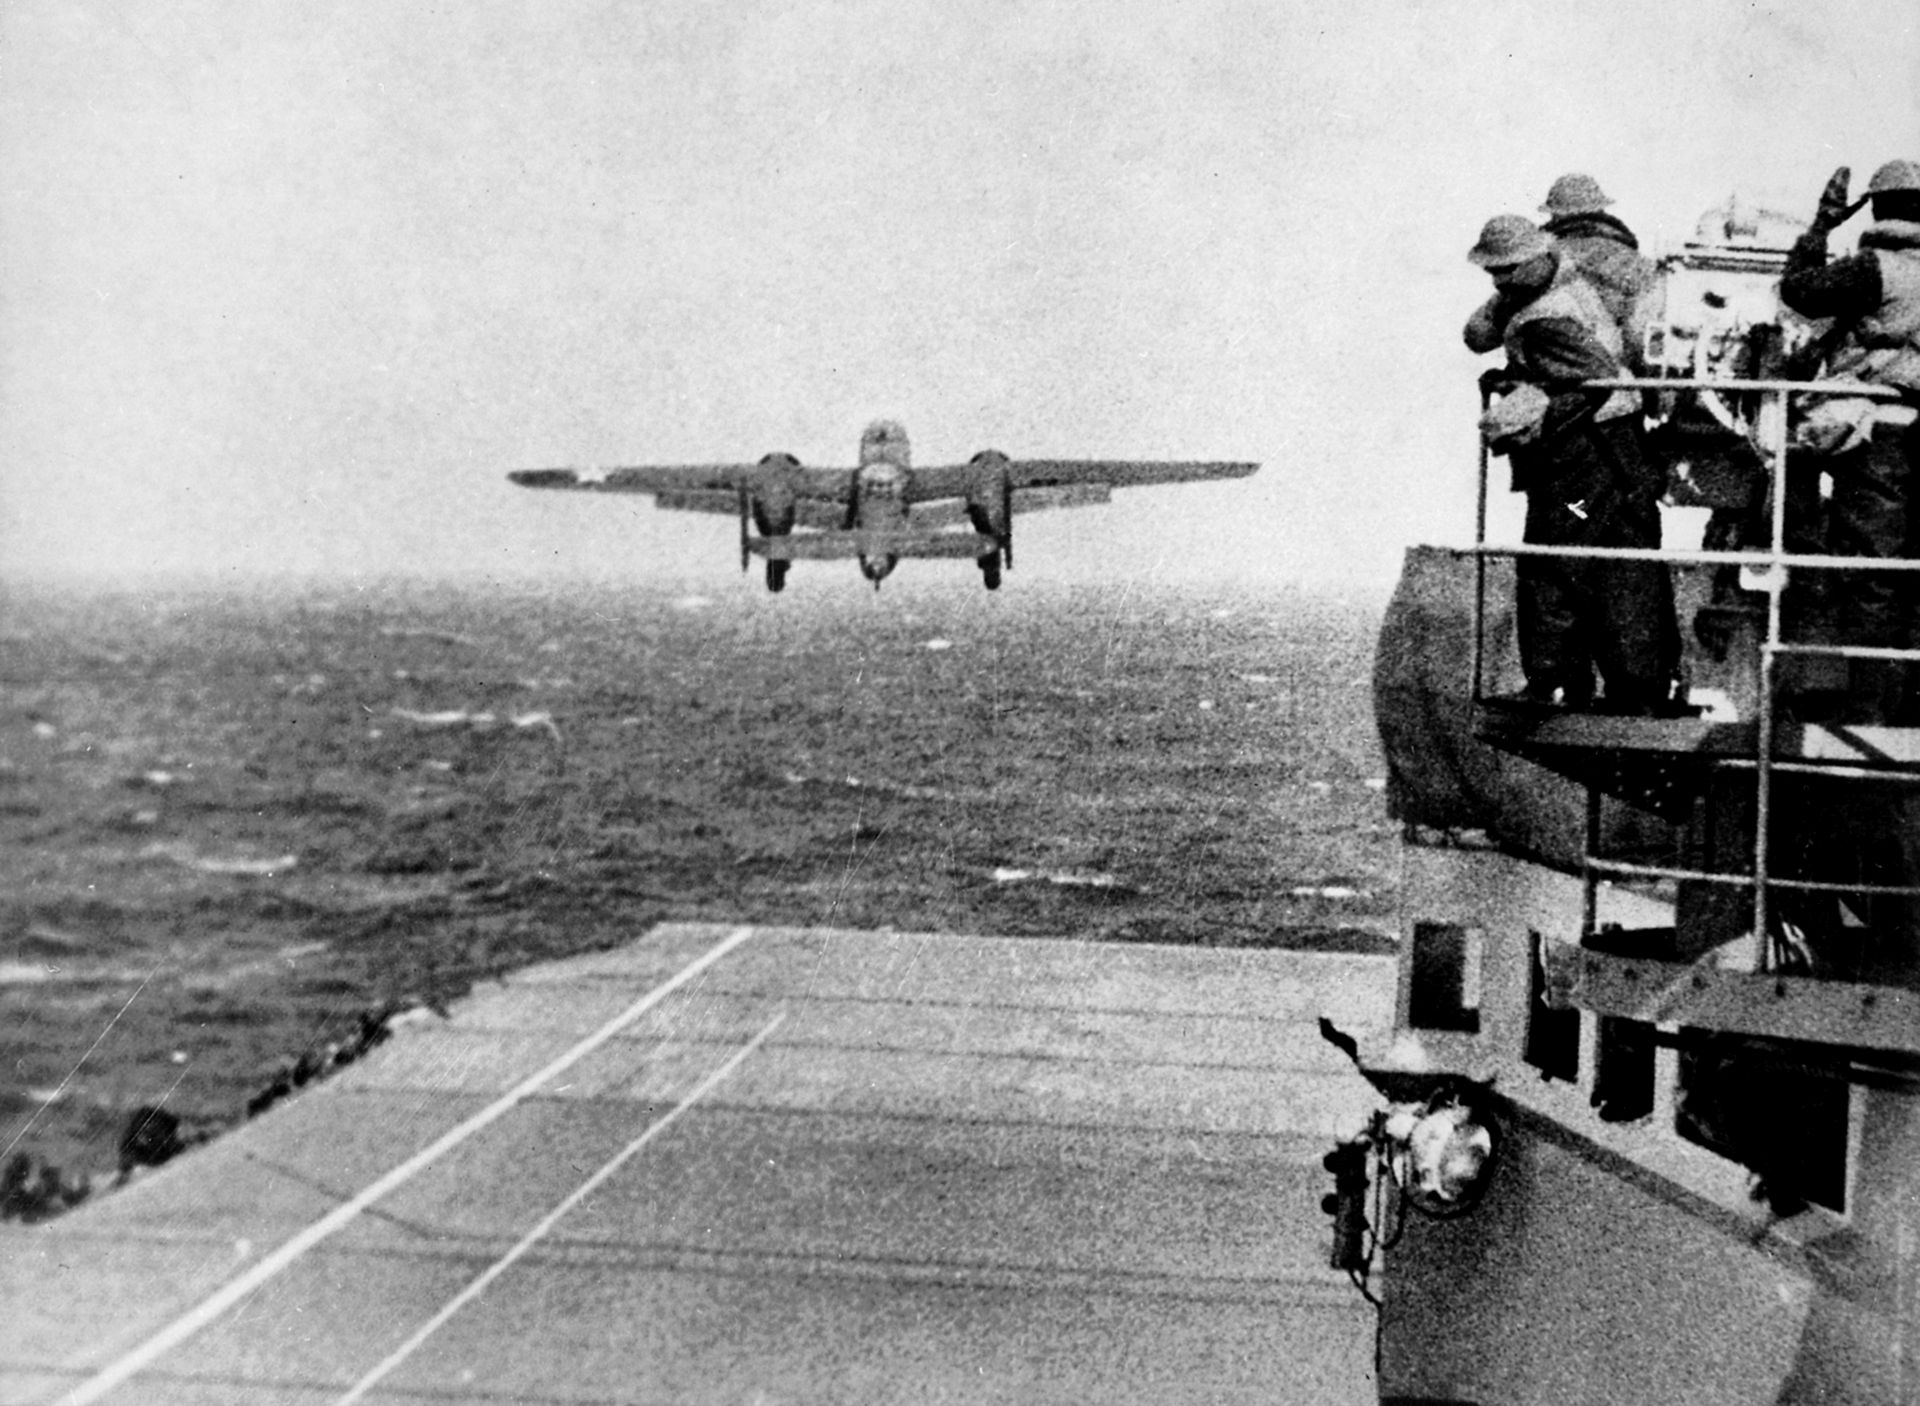 Doolittle takes off from the Hornet